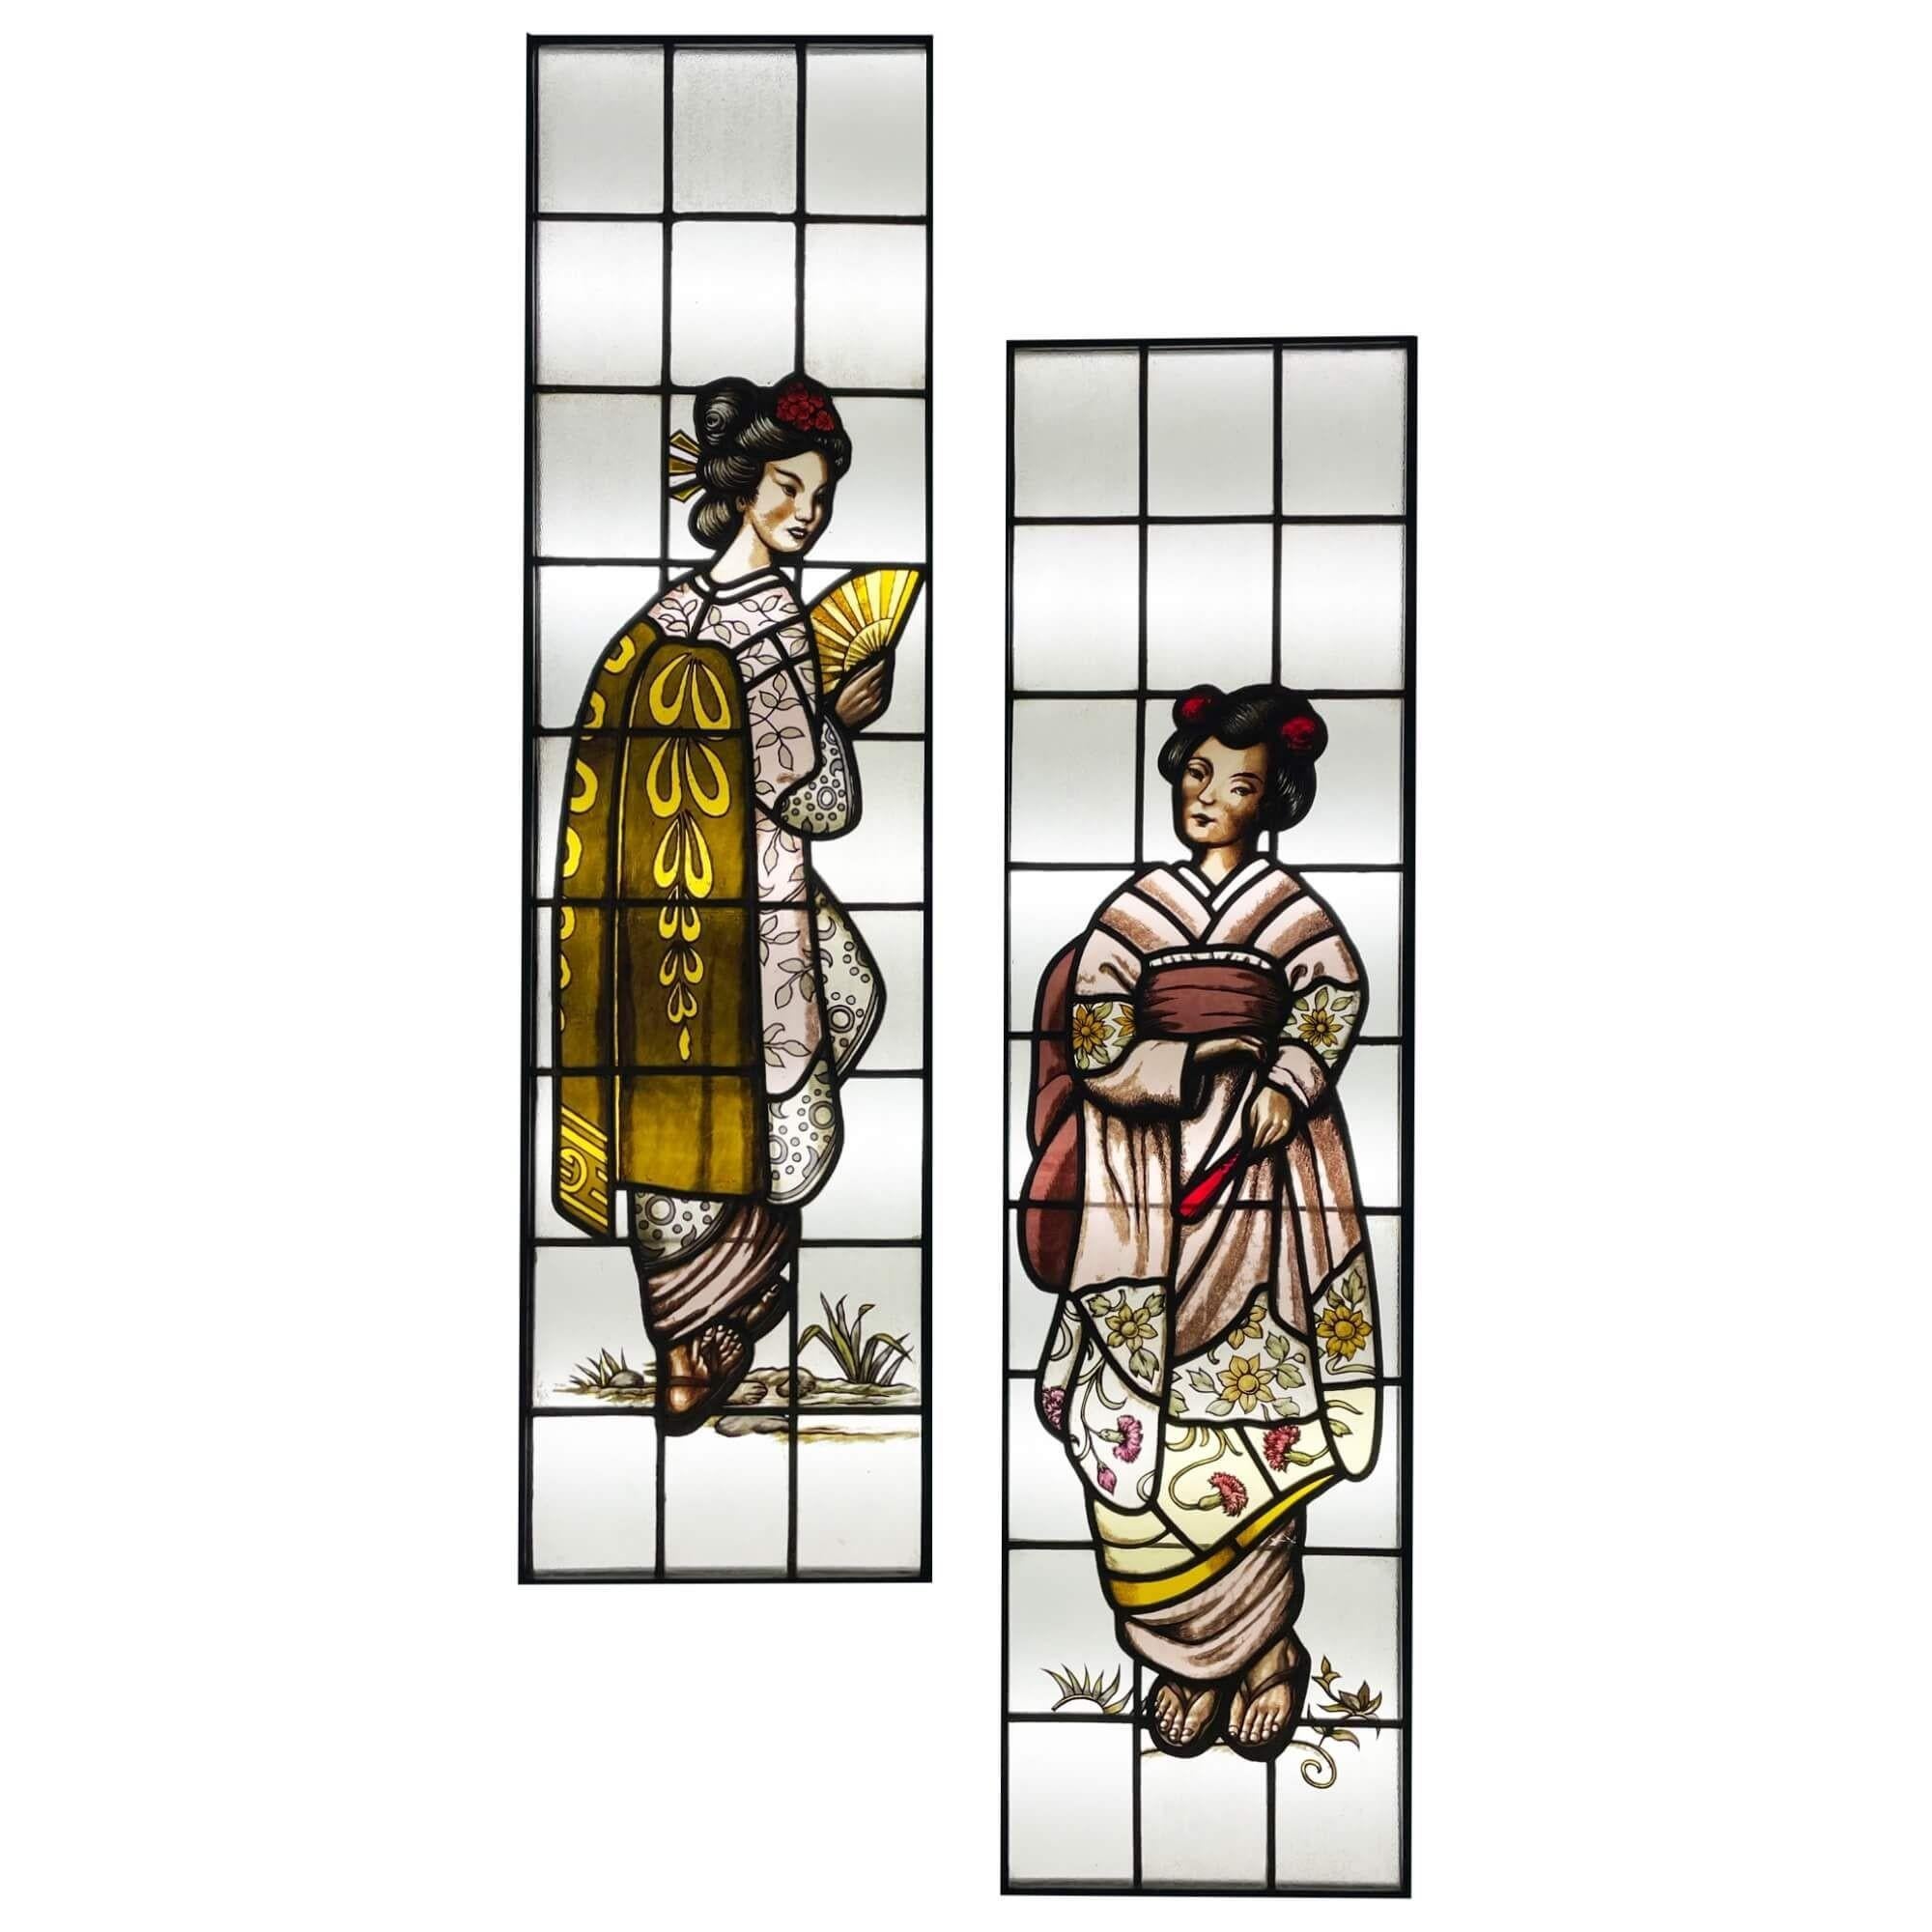 A set of 2 elegantly hand painted Japanese style stained glass panels fitted into painted wooden frames. At a height of 147cm, these tall stained glass panels make a beautiful set of windows for a Japanese style interior or could be used as doors